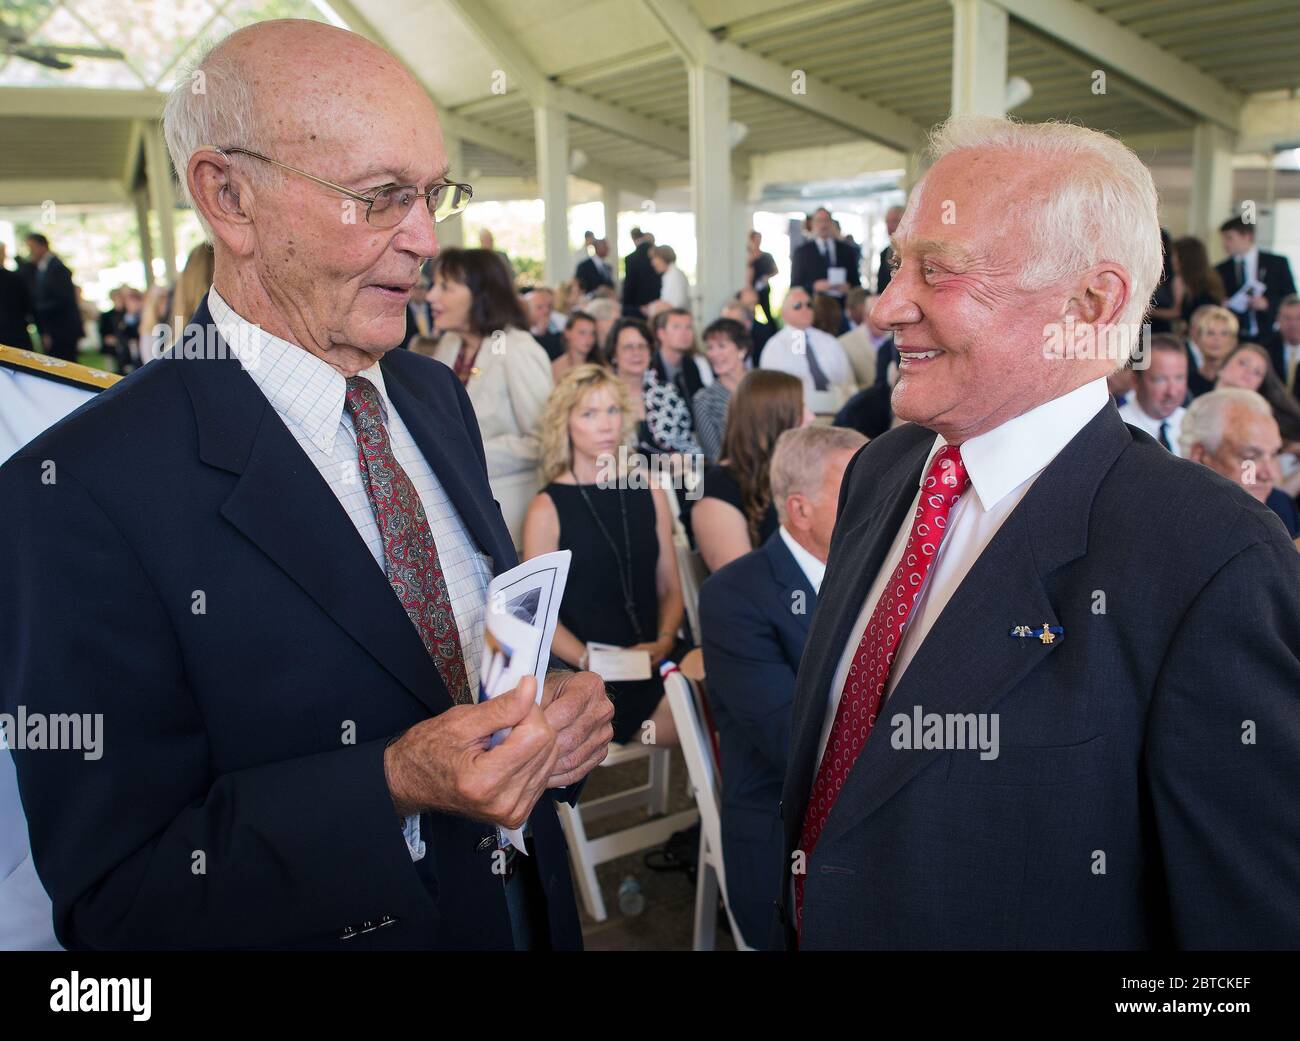 Apollo 11 Astronauts Michael Collins, left, and Buzz Aldrin talk at a private memorial service celebrating the life of Neil Armstrong, Aug. 31, 2012, at the Camargo Club in Cincinnati.  (NASA/Bill Ingalls) Stock Photo